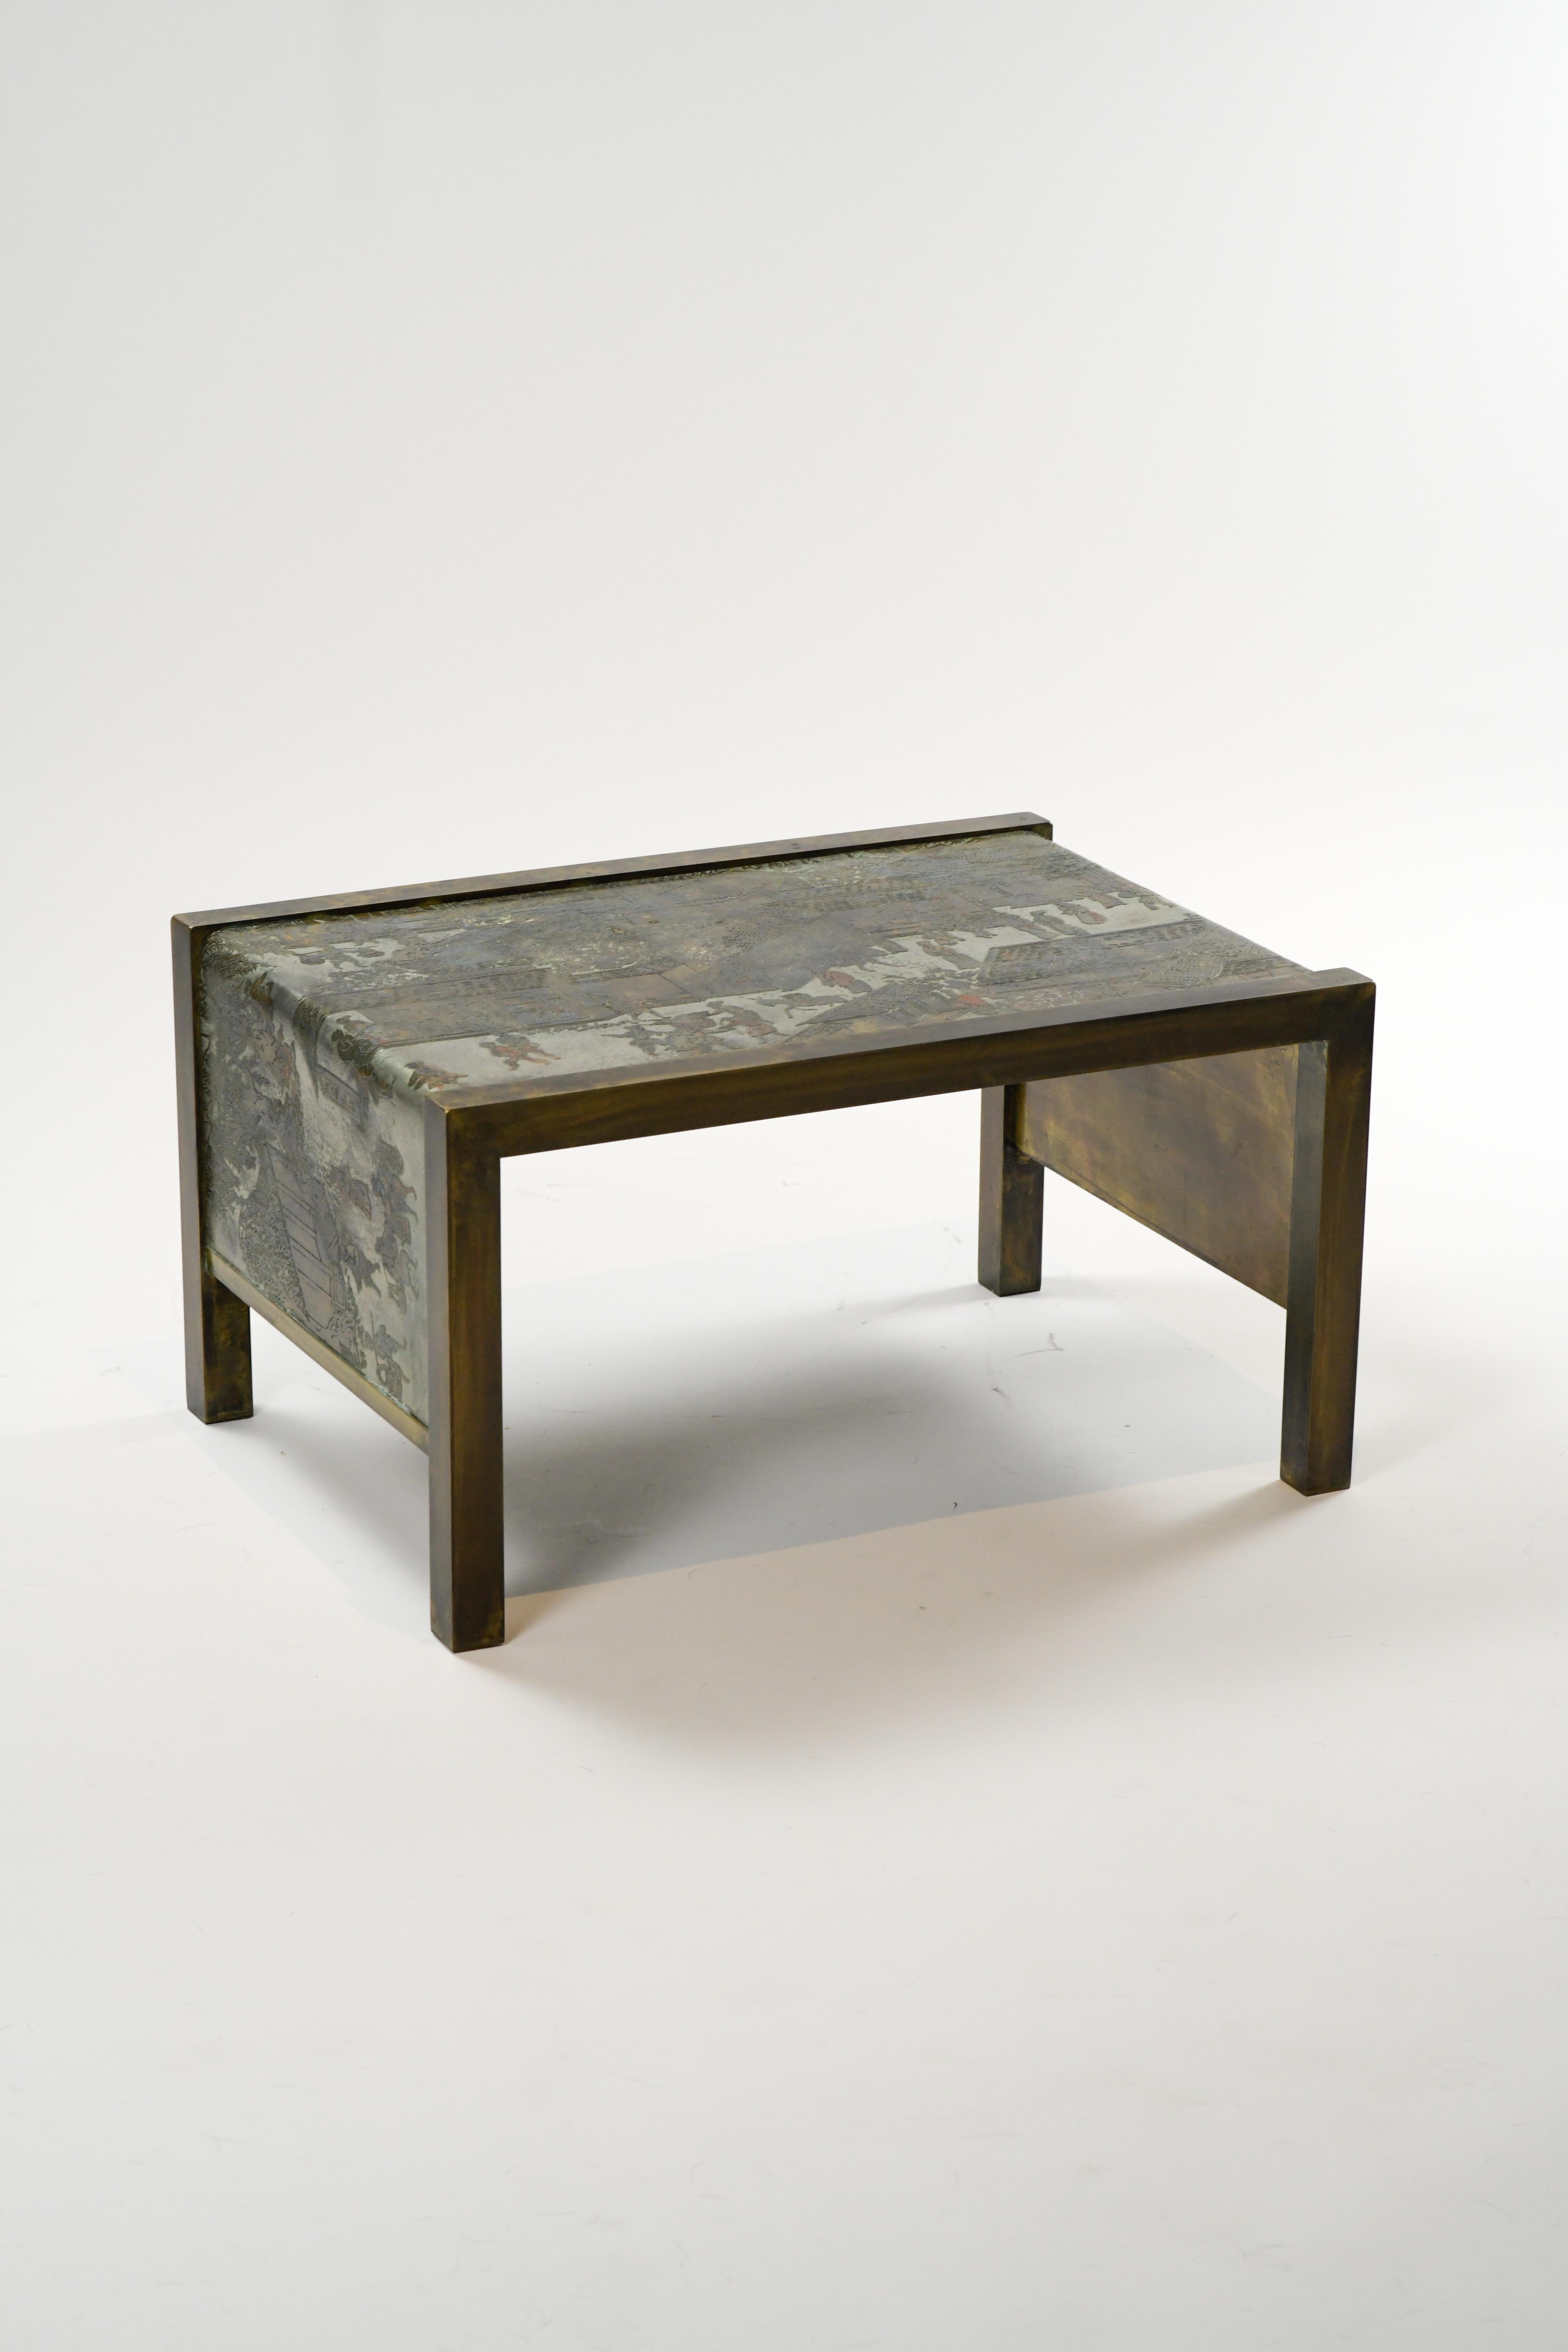 A gorgeous Spring Festival Coffee table from the iconic father/son duo, Philip and Kelvin LaVerne. This table is absolutely stunning and is guaranteed to elevate any interior it finds a home in. The etched, enameled and patinated brass, pewter and